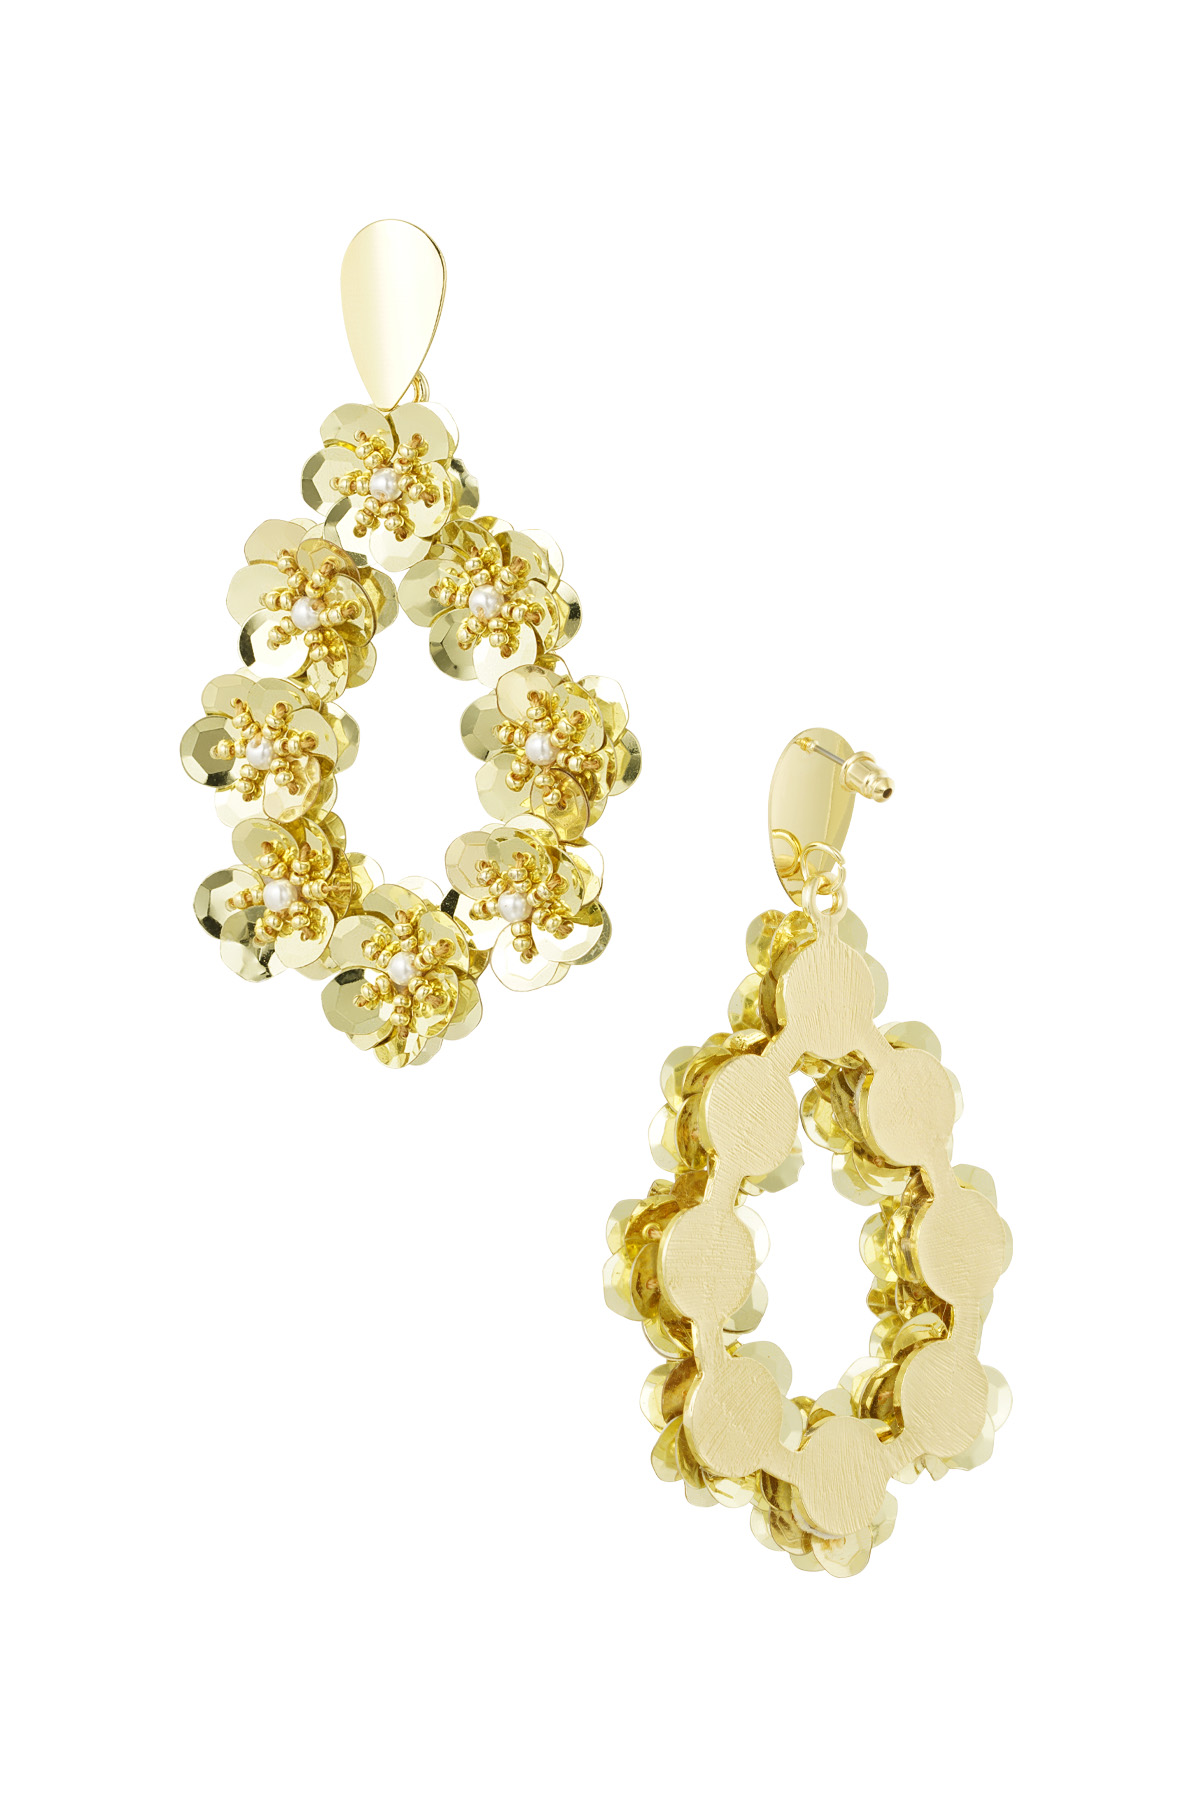 Hanging earrings with flowers - gold 